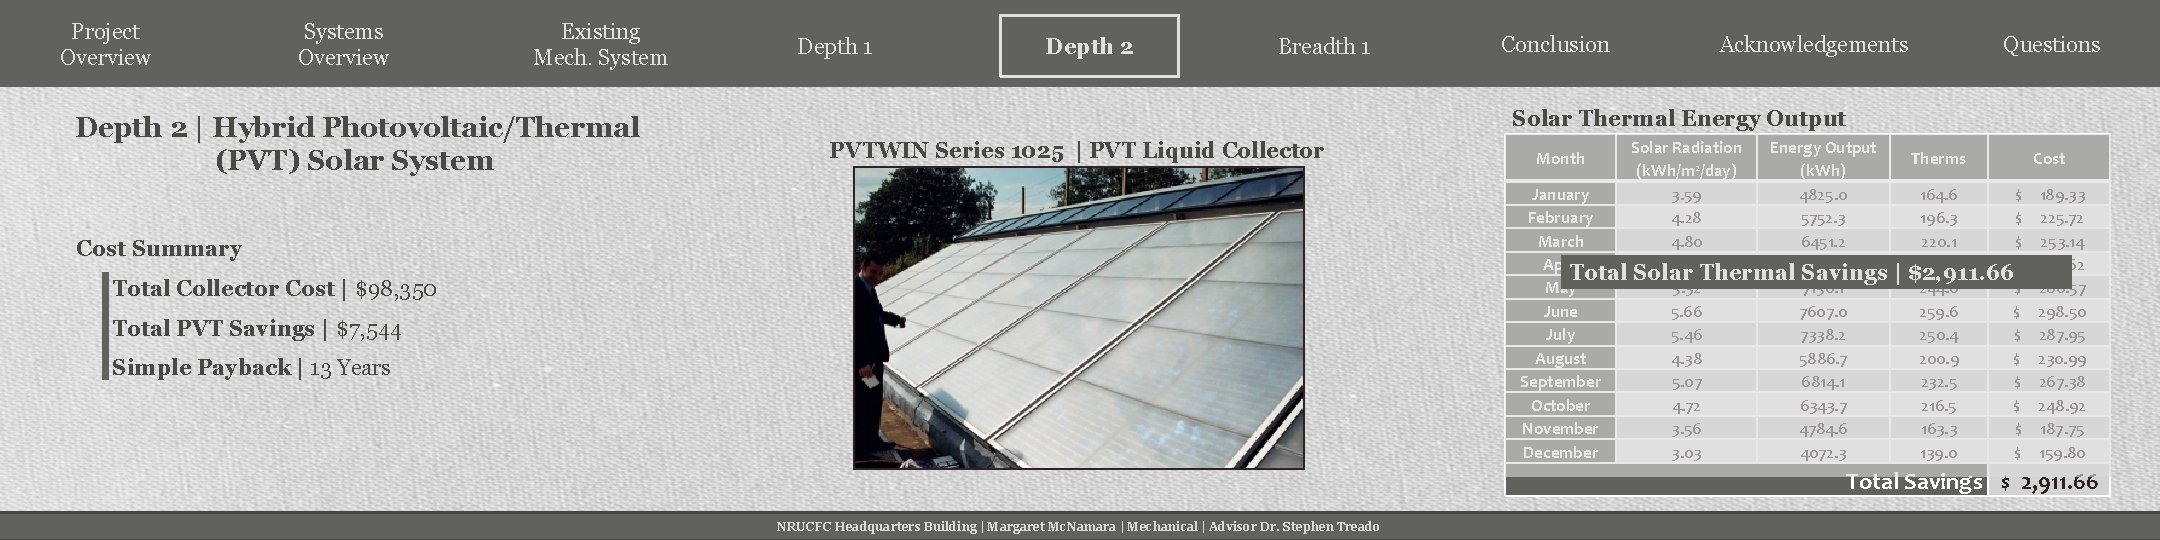 Project Overview Systems Overview Existing Mech. System Depth 2 | Hybrid Photovoltaic/Thermal (PVT) Solar